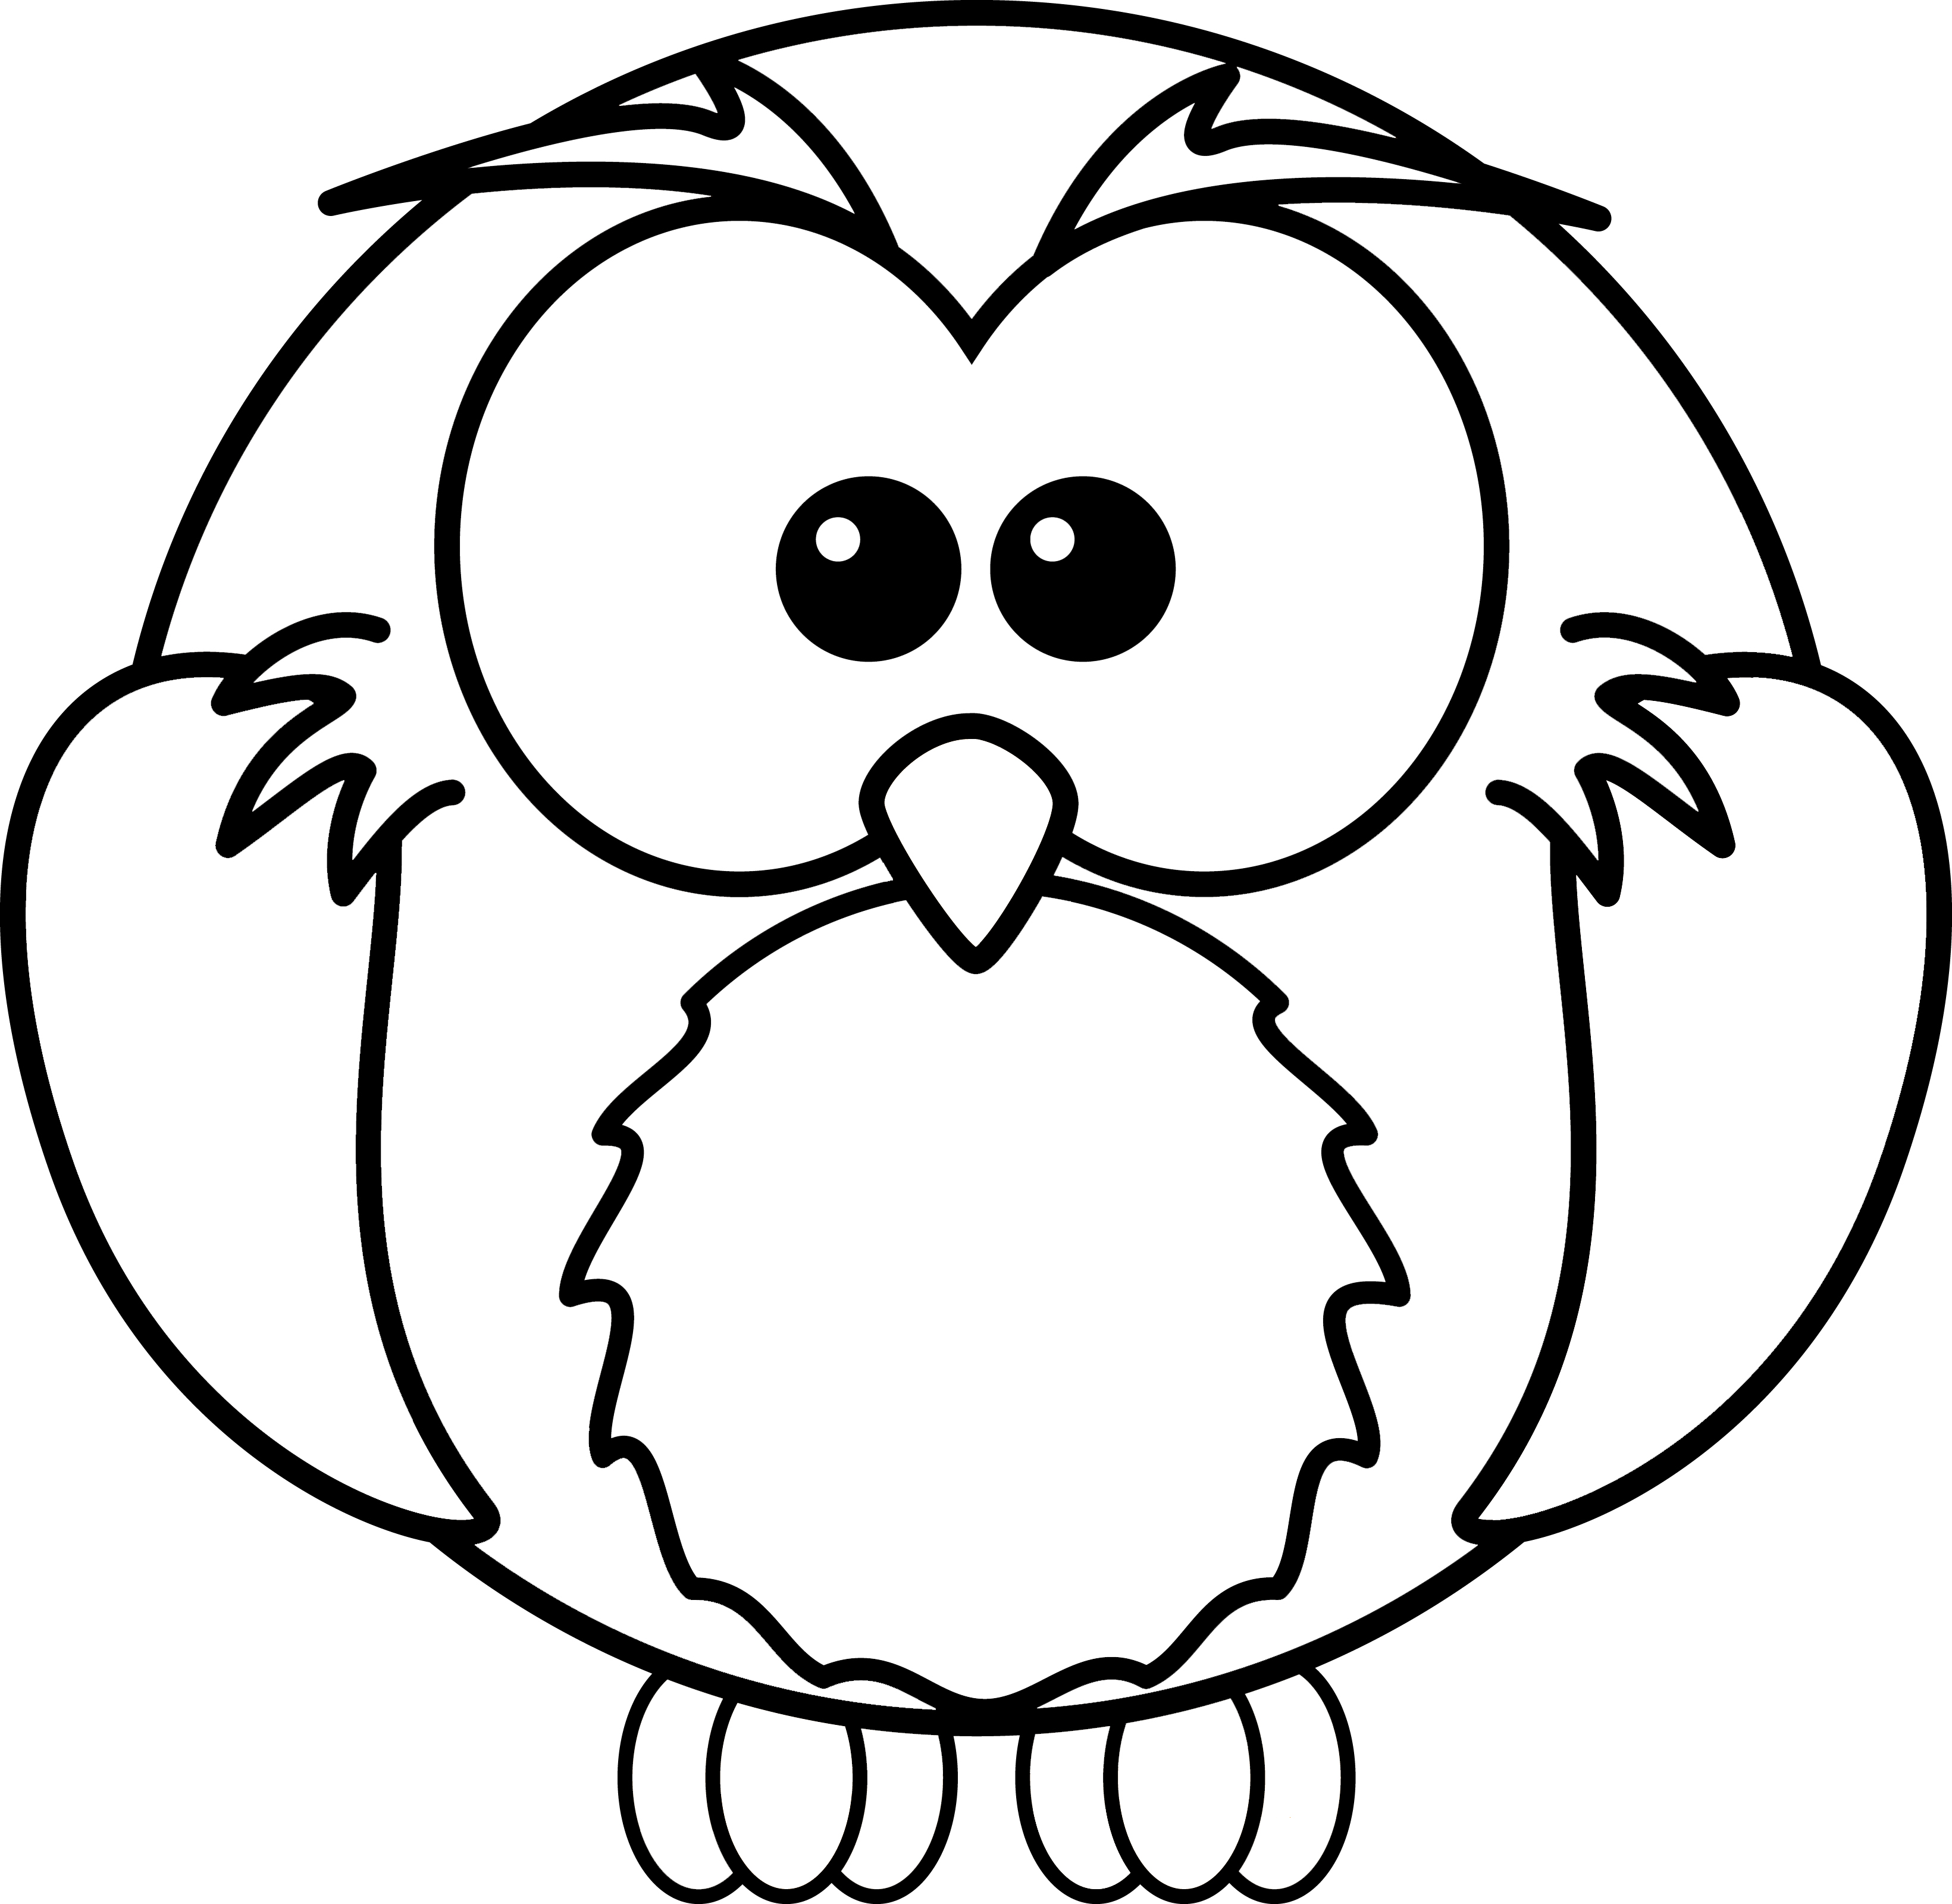 3281x3200 Best Cute Owl Coloring Pages To Print 44 With Additional Coloring